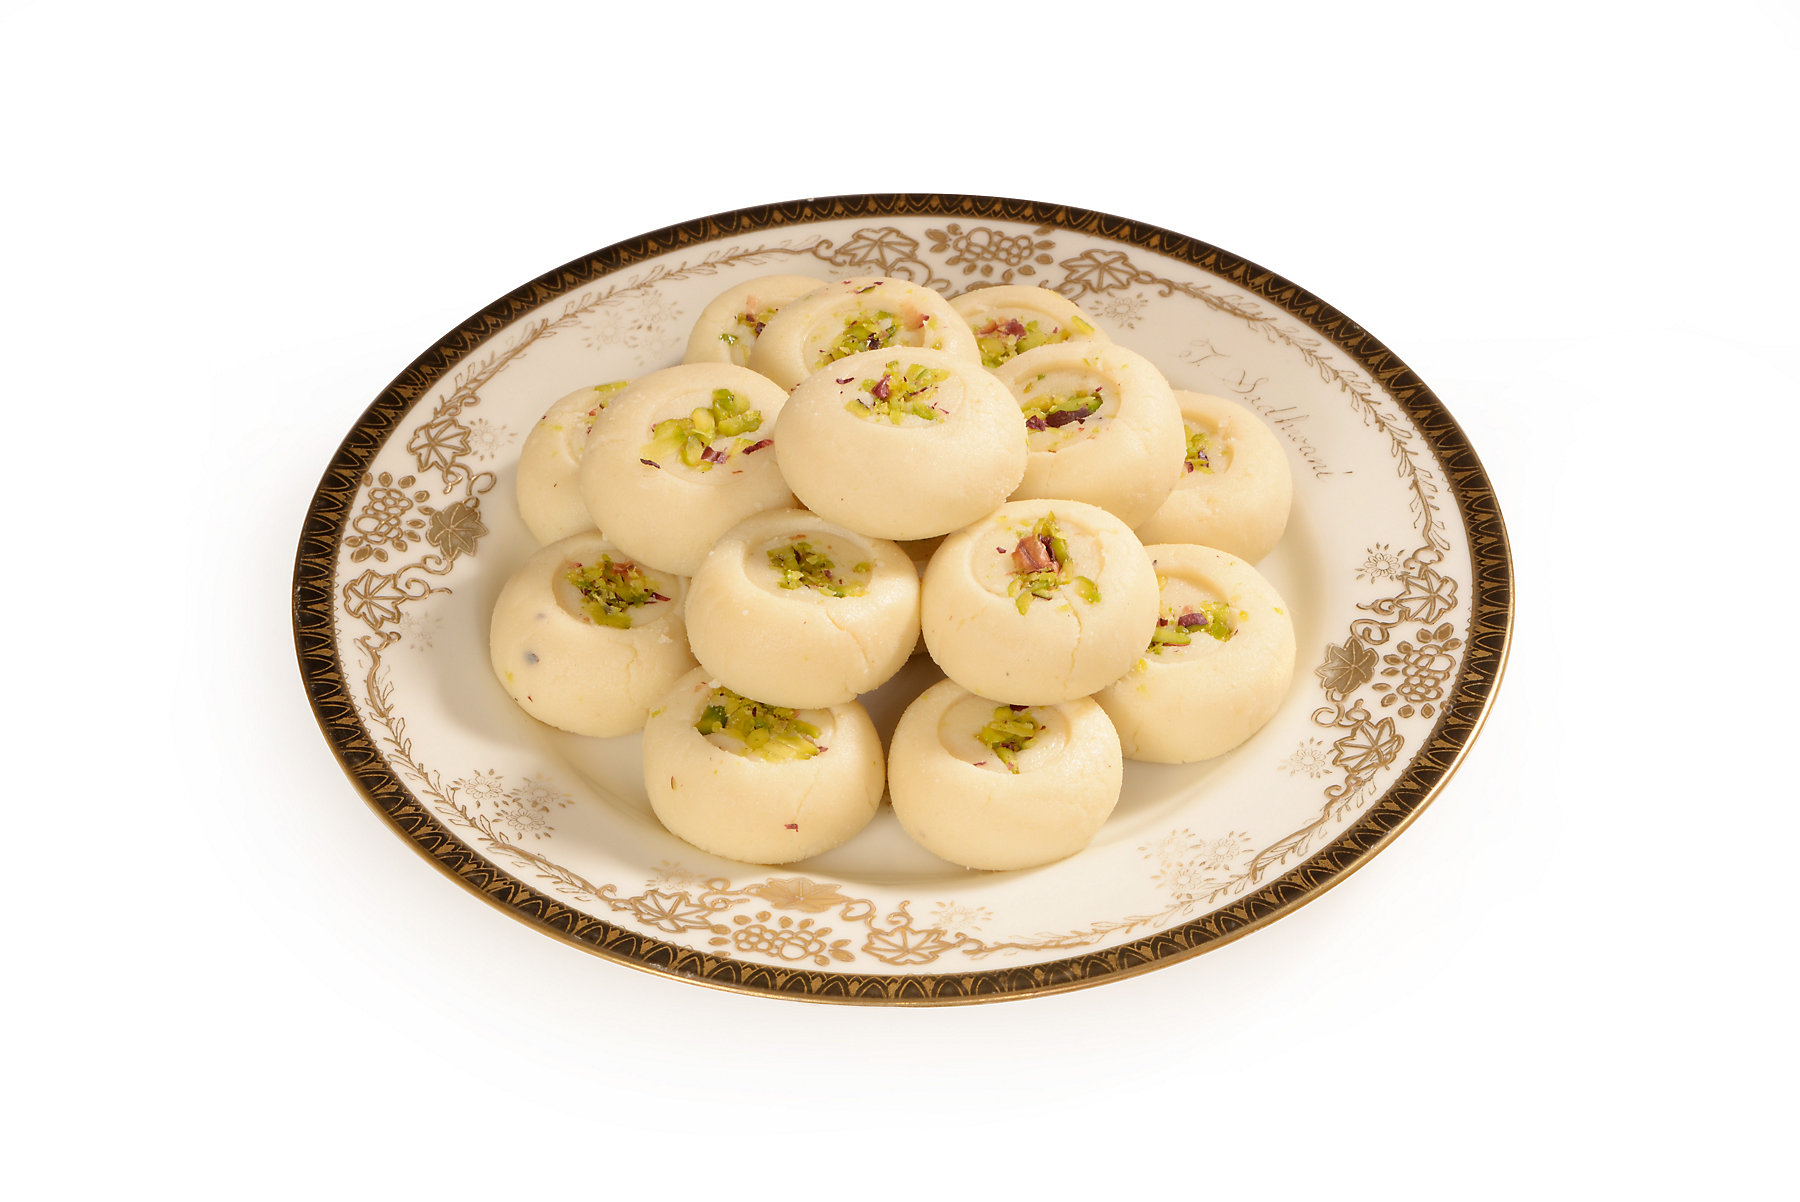 Malai sweet cow milk peda with pistachio garnishing in old vintage plate 